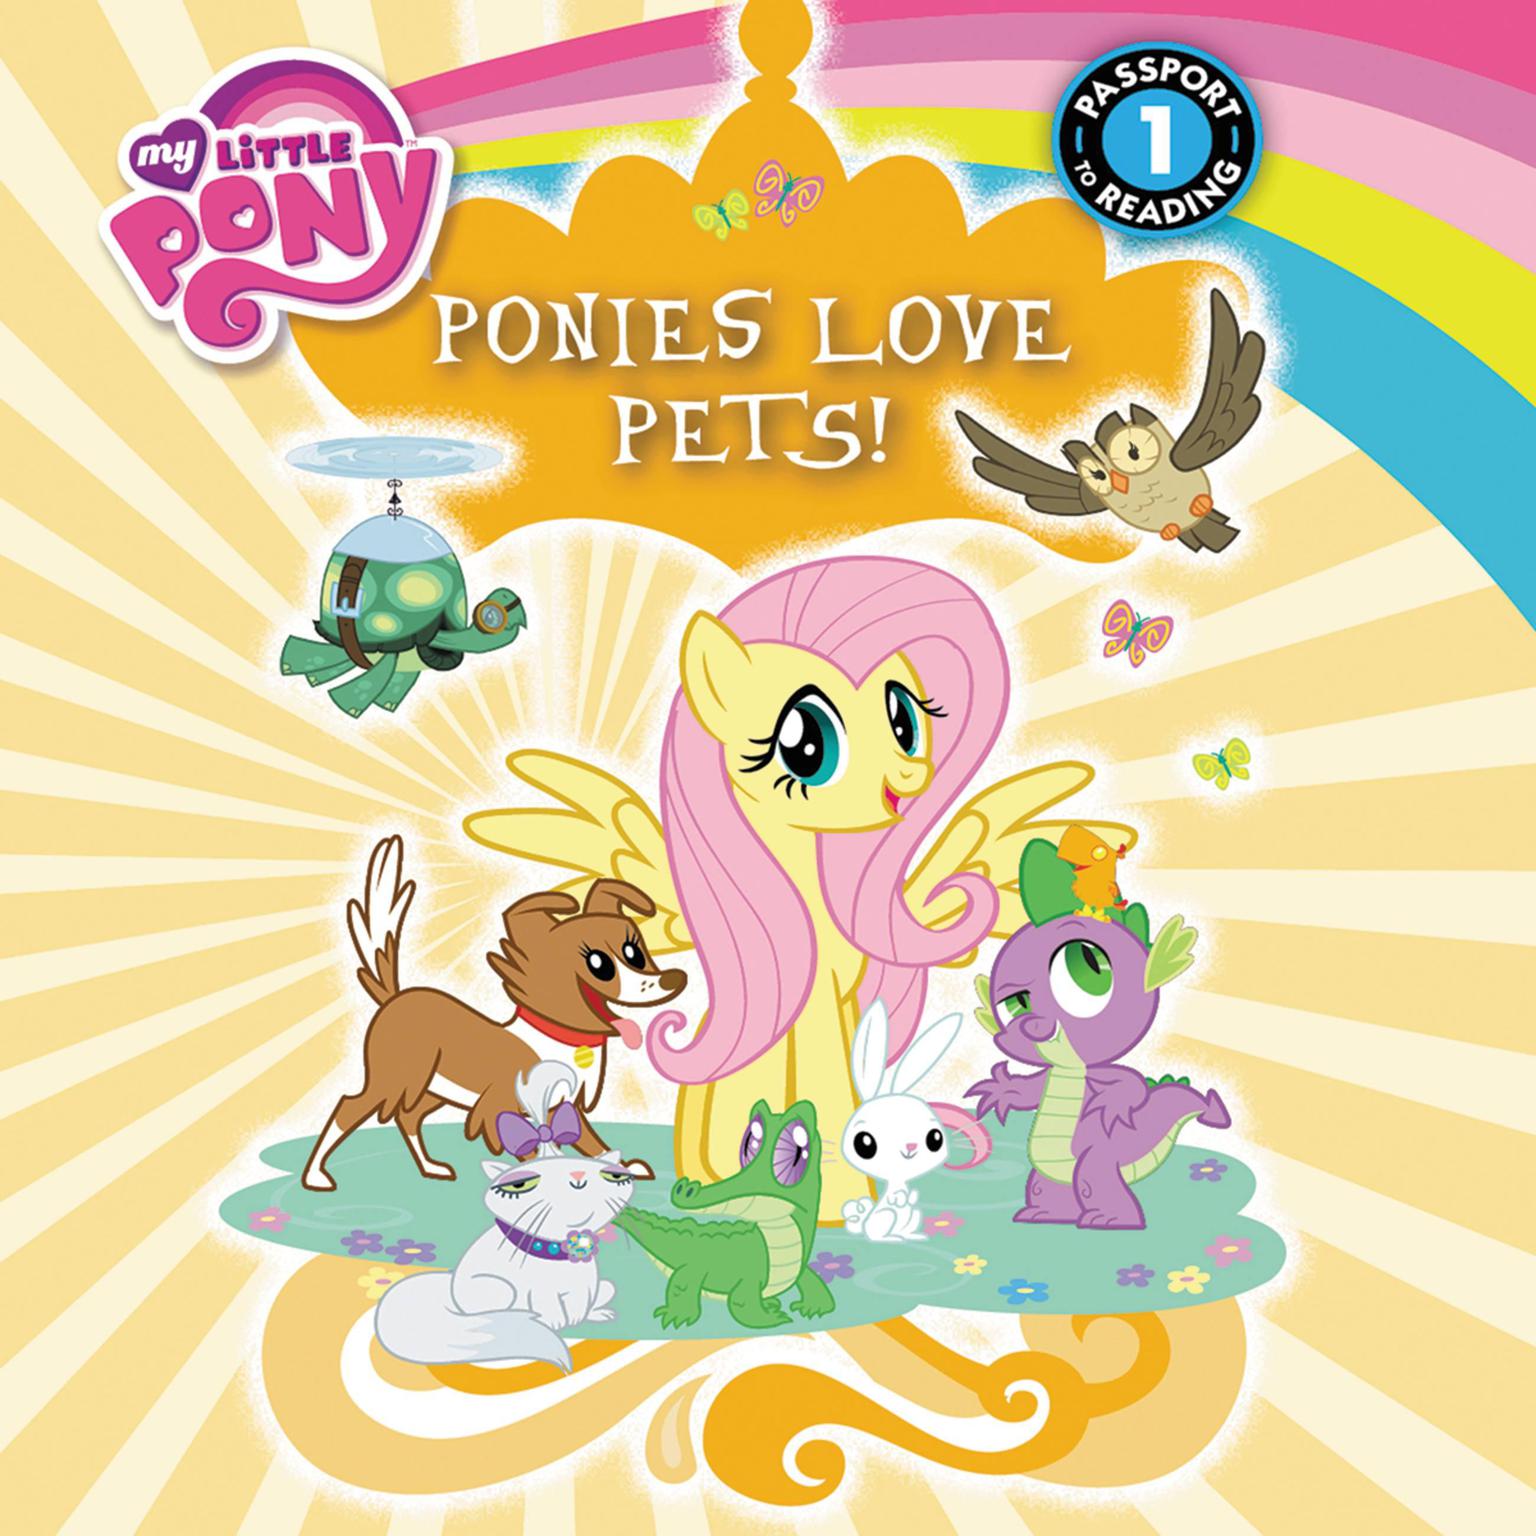 My Little Pony: Ponies Love Pets!: Level 1  Audiobook, by Emily C. Hughes